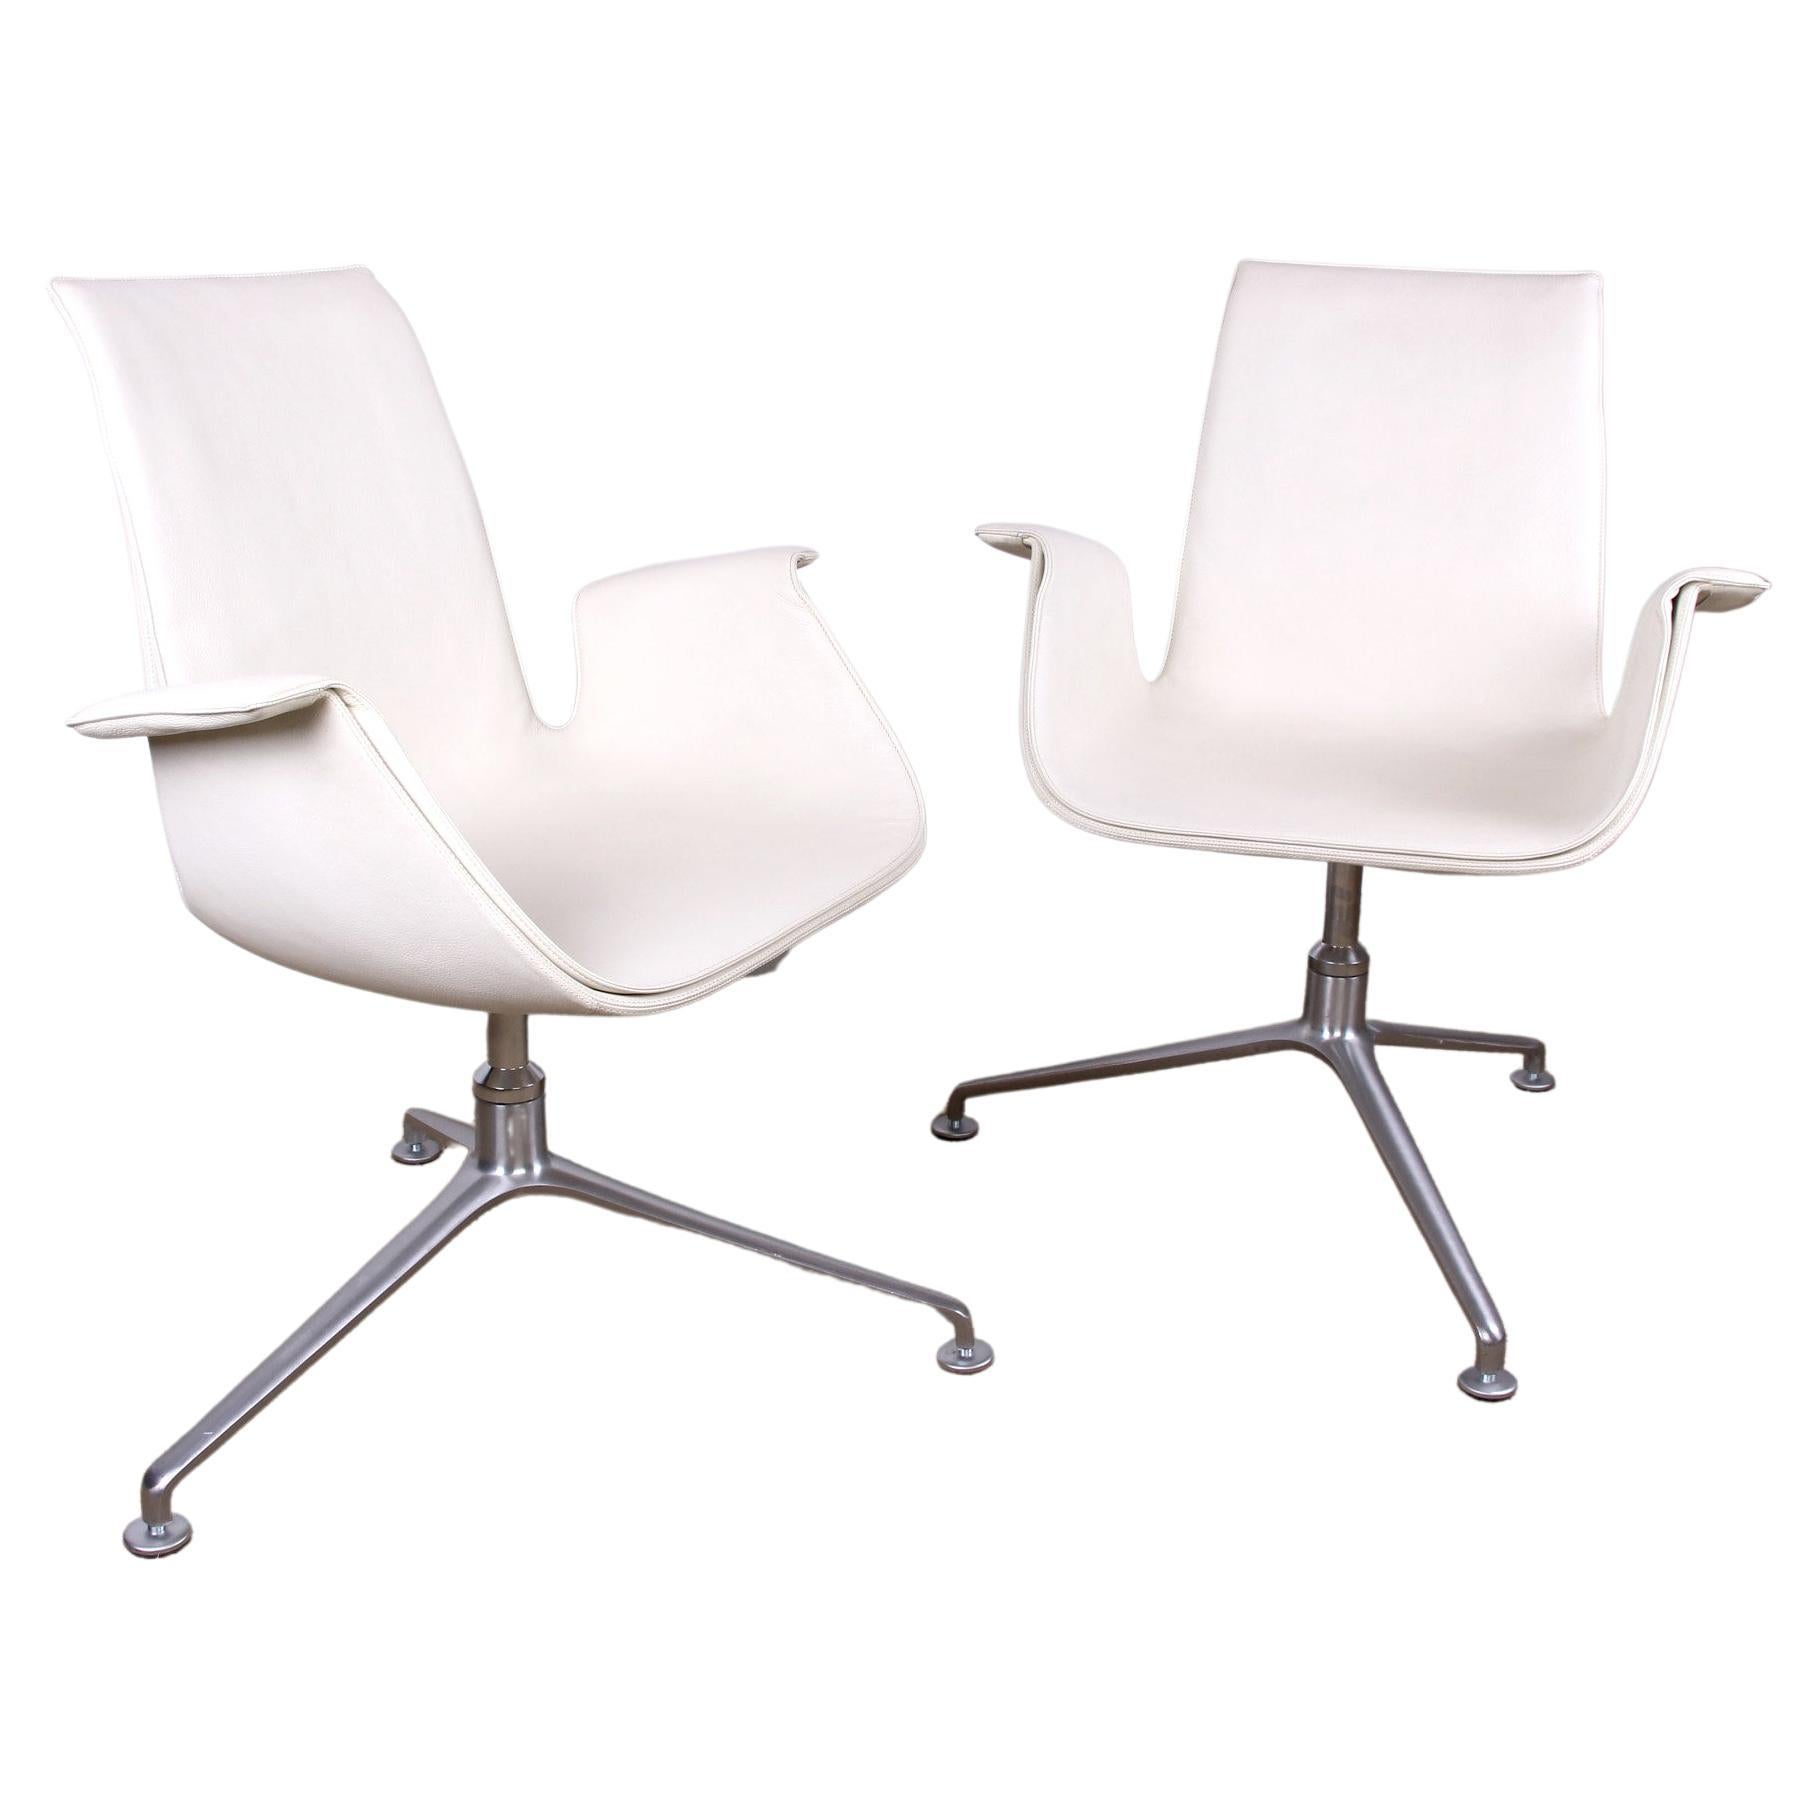 Pair of Danish Armchairs in Leather and Steel, model FK 6725 by Preben Fabricius For Sale